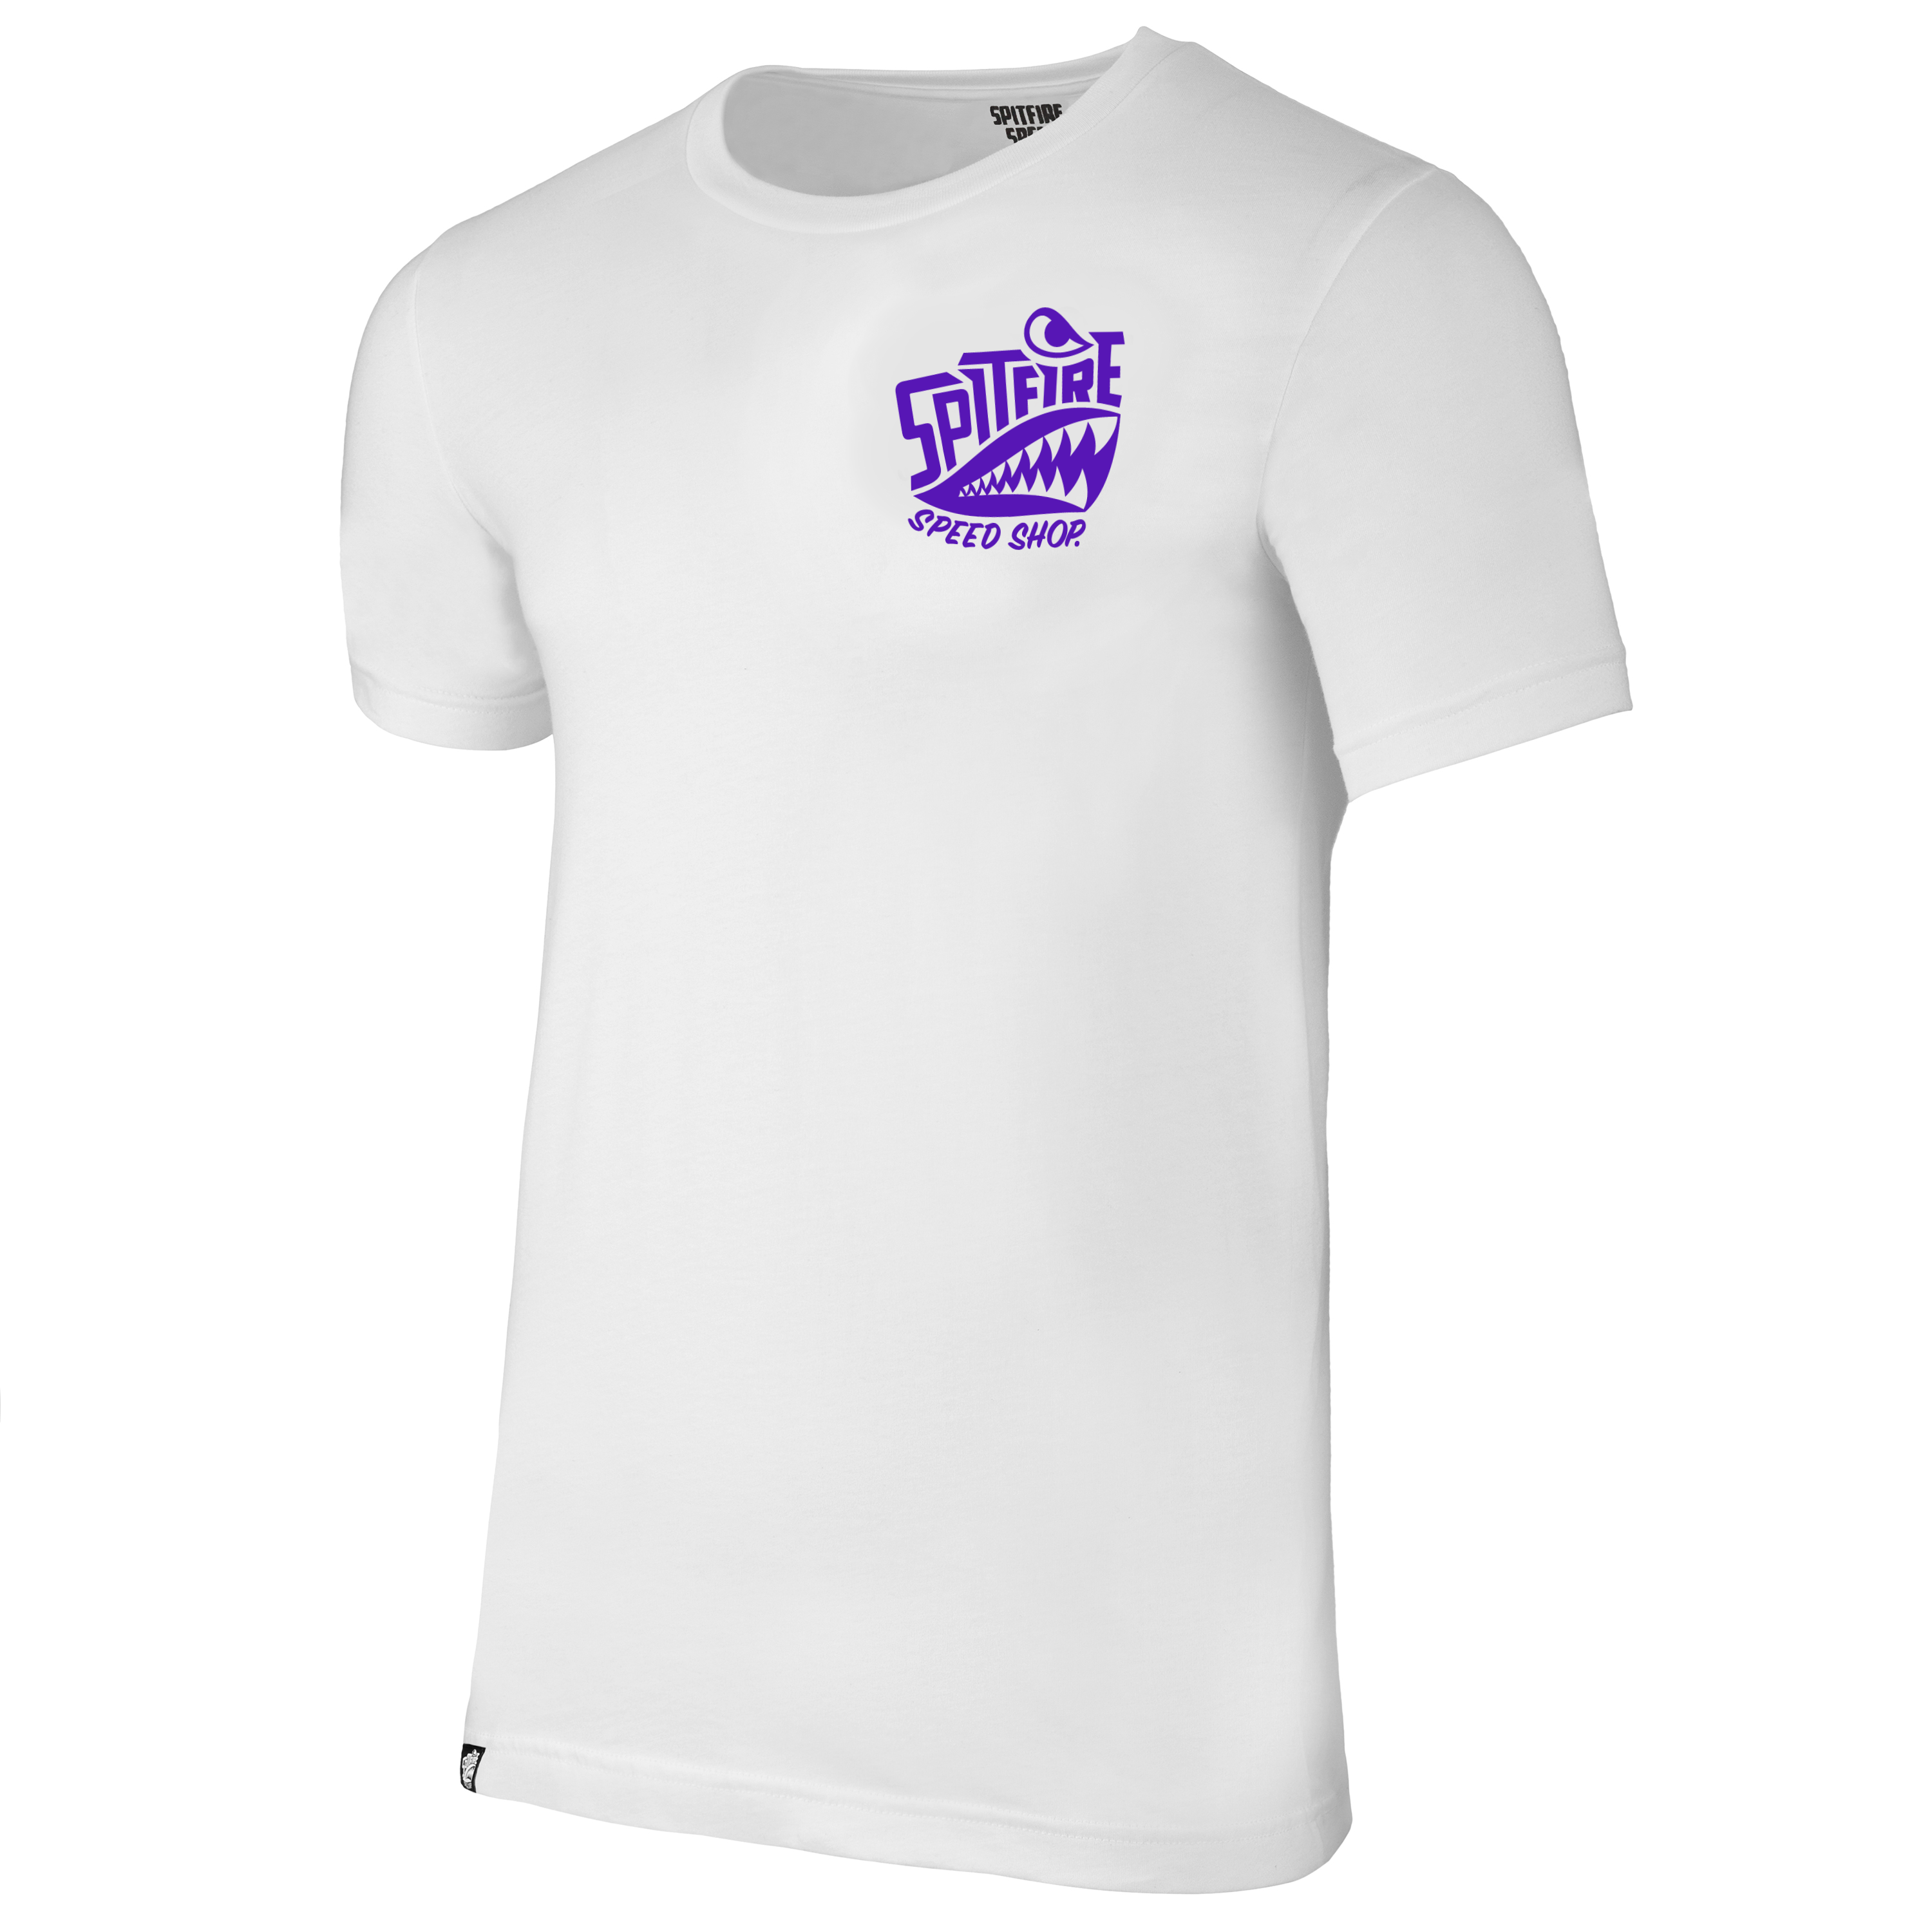 Spitfire White T-Shirt With Purple Spitfire Front Logo